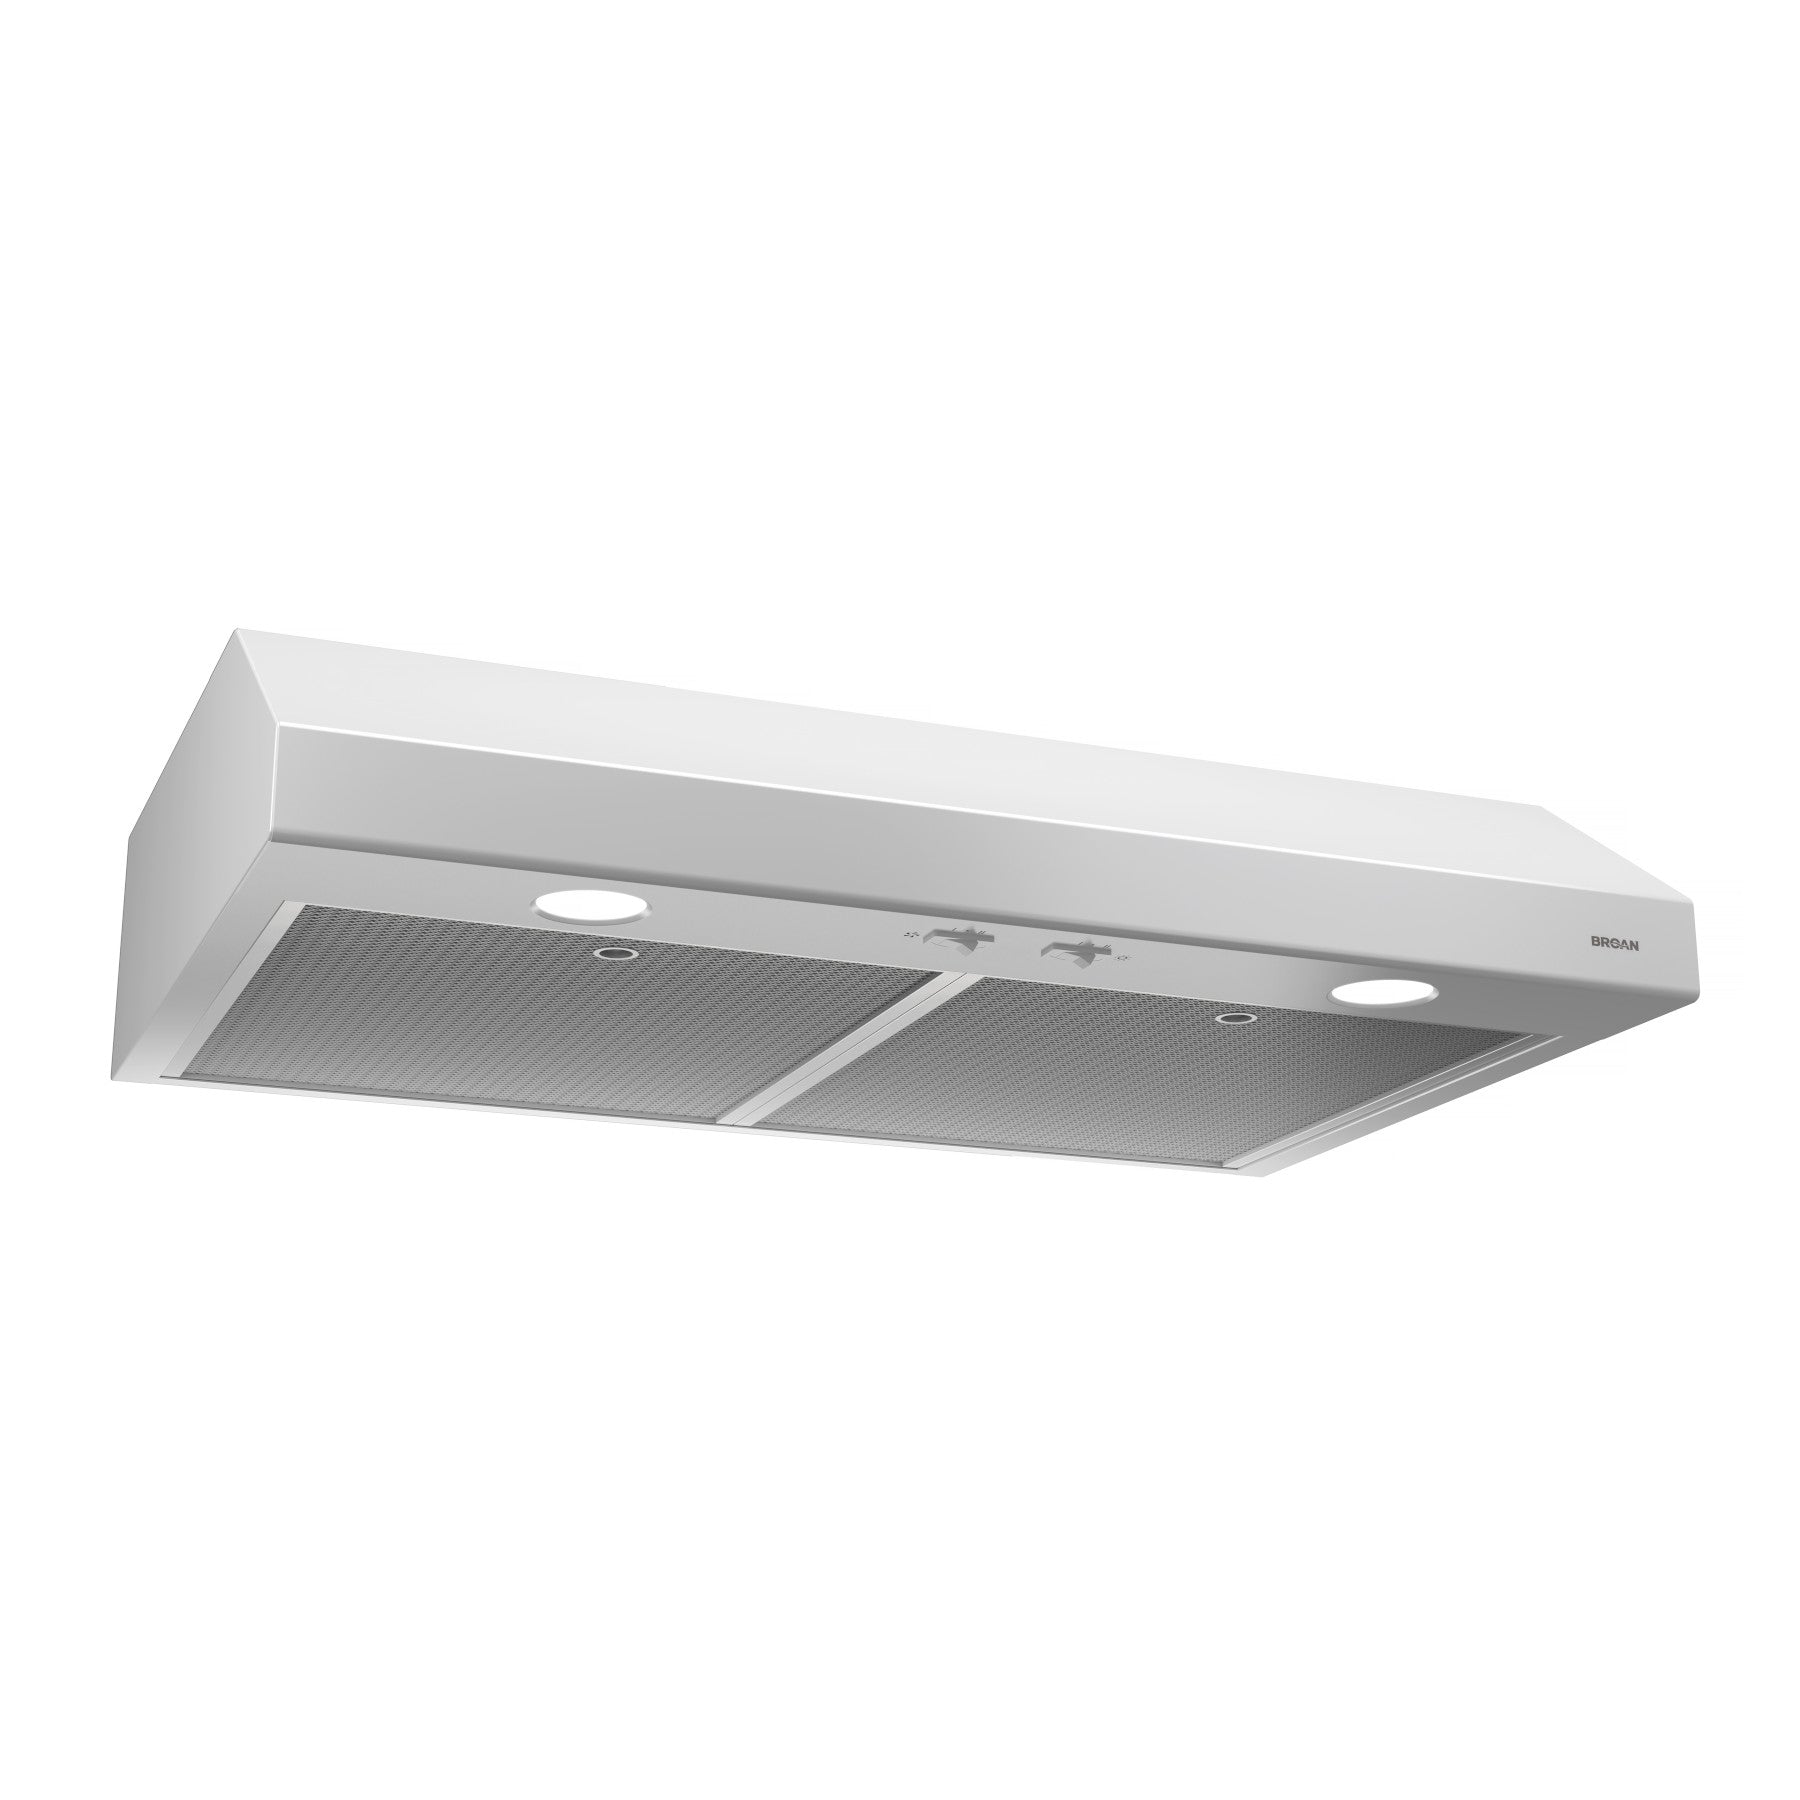 Broan - 24 Inch 300 CFM Under Cabinet Range Vent in Stainless - BCS324WWC